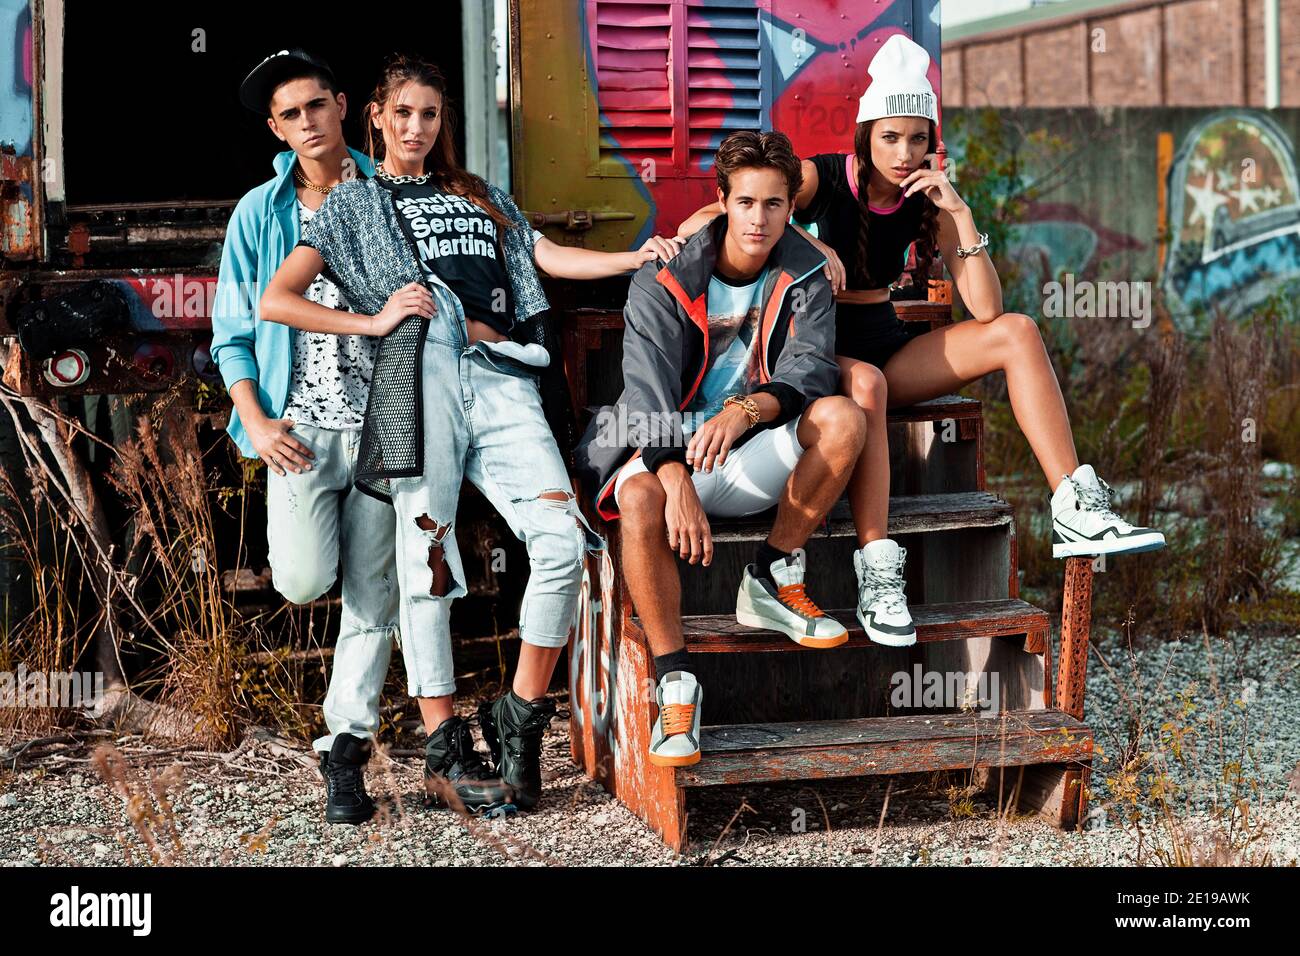 A portrait of an interracial group of 4 young adults sitting on wooden steps in front of an open graffiti sprayed container on a vacant lot. Stock Photo